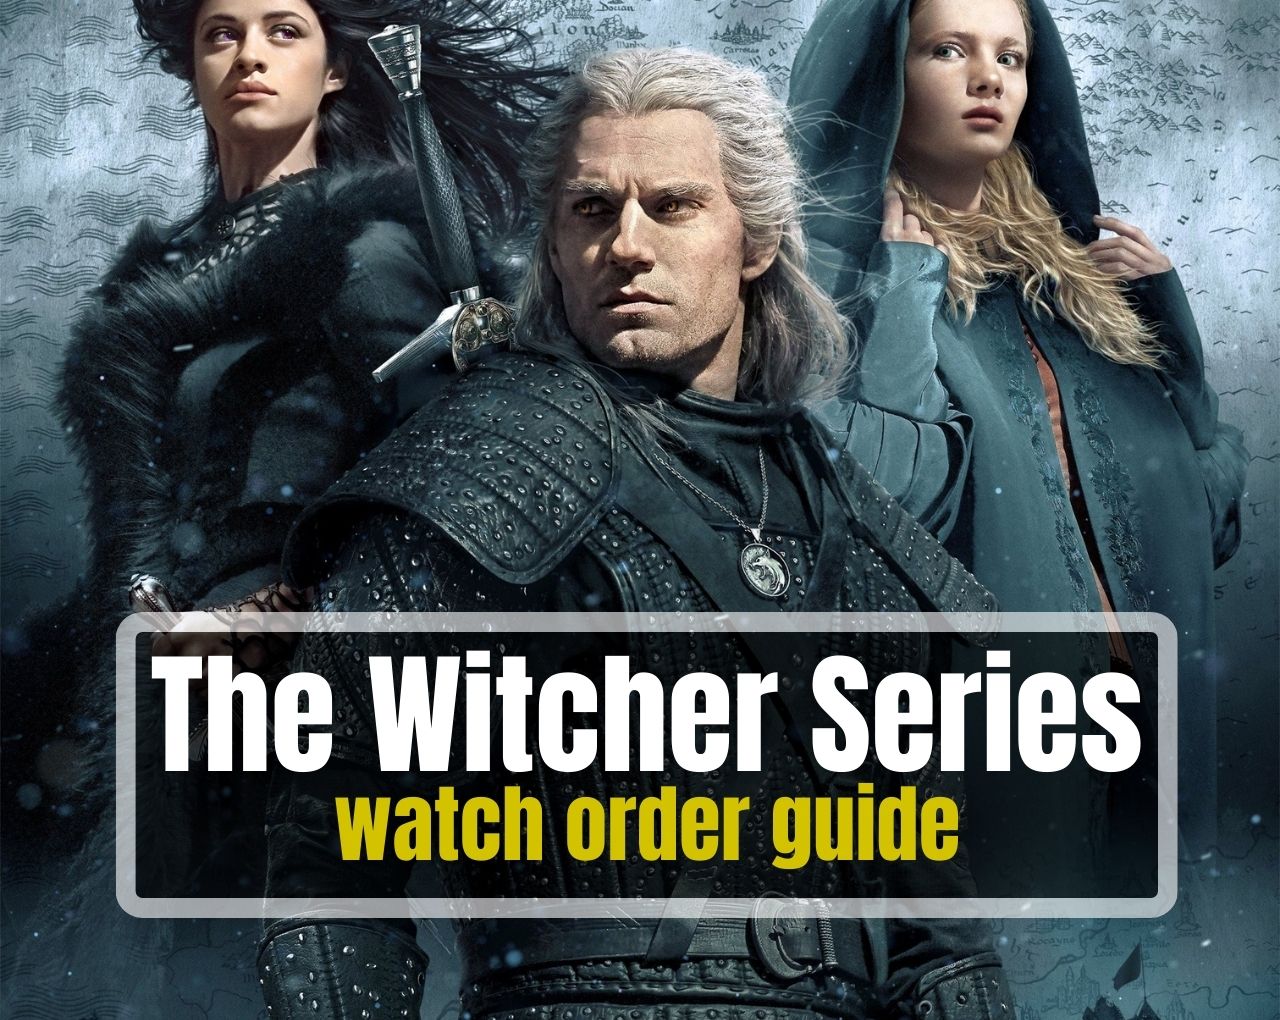 The Witcher series watch order guide